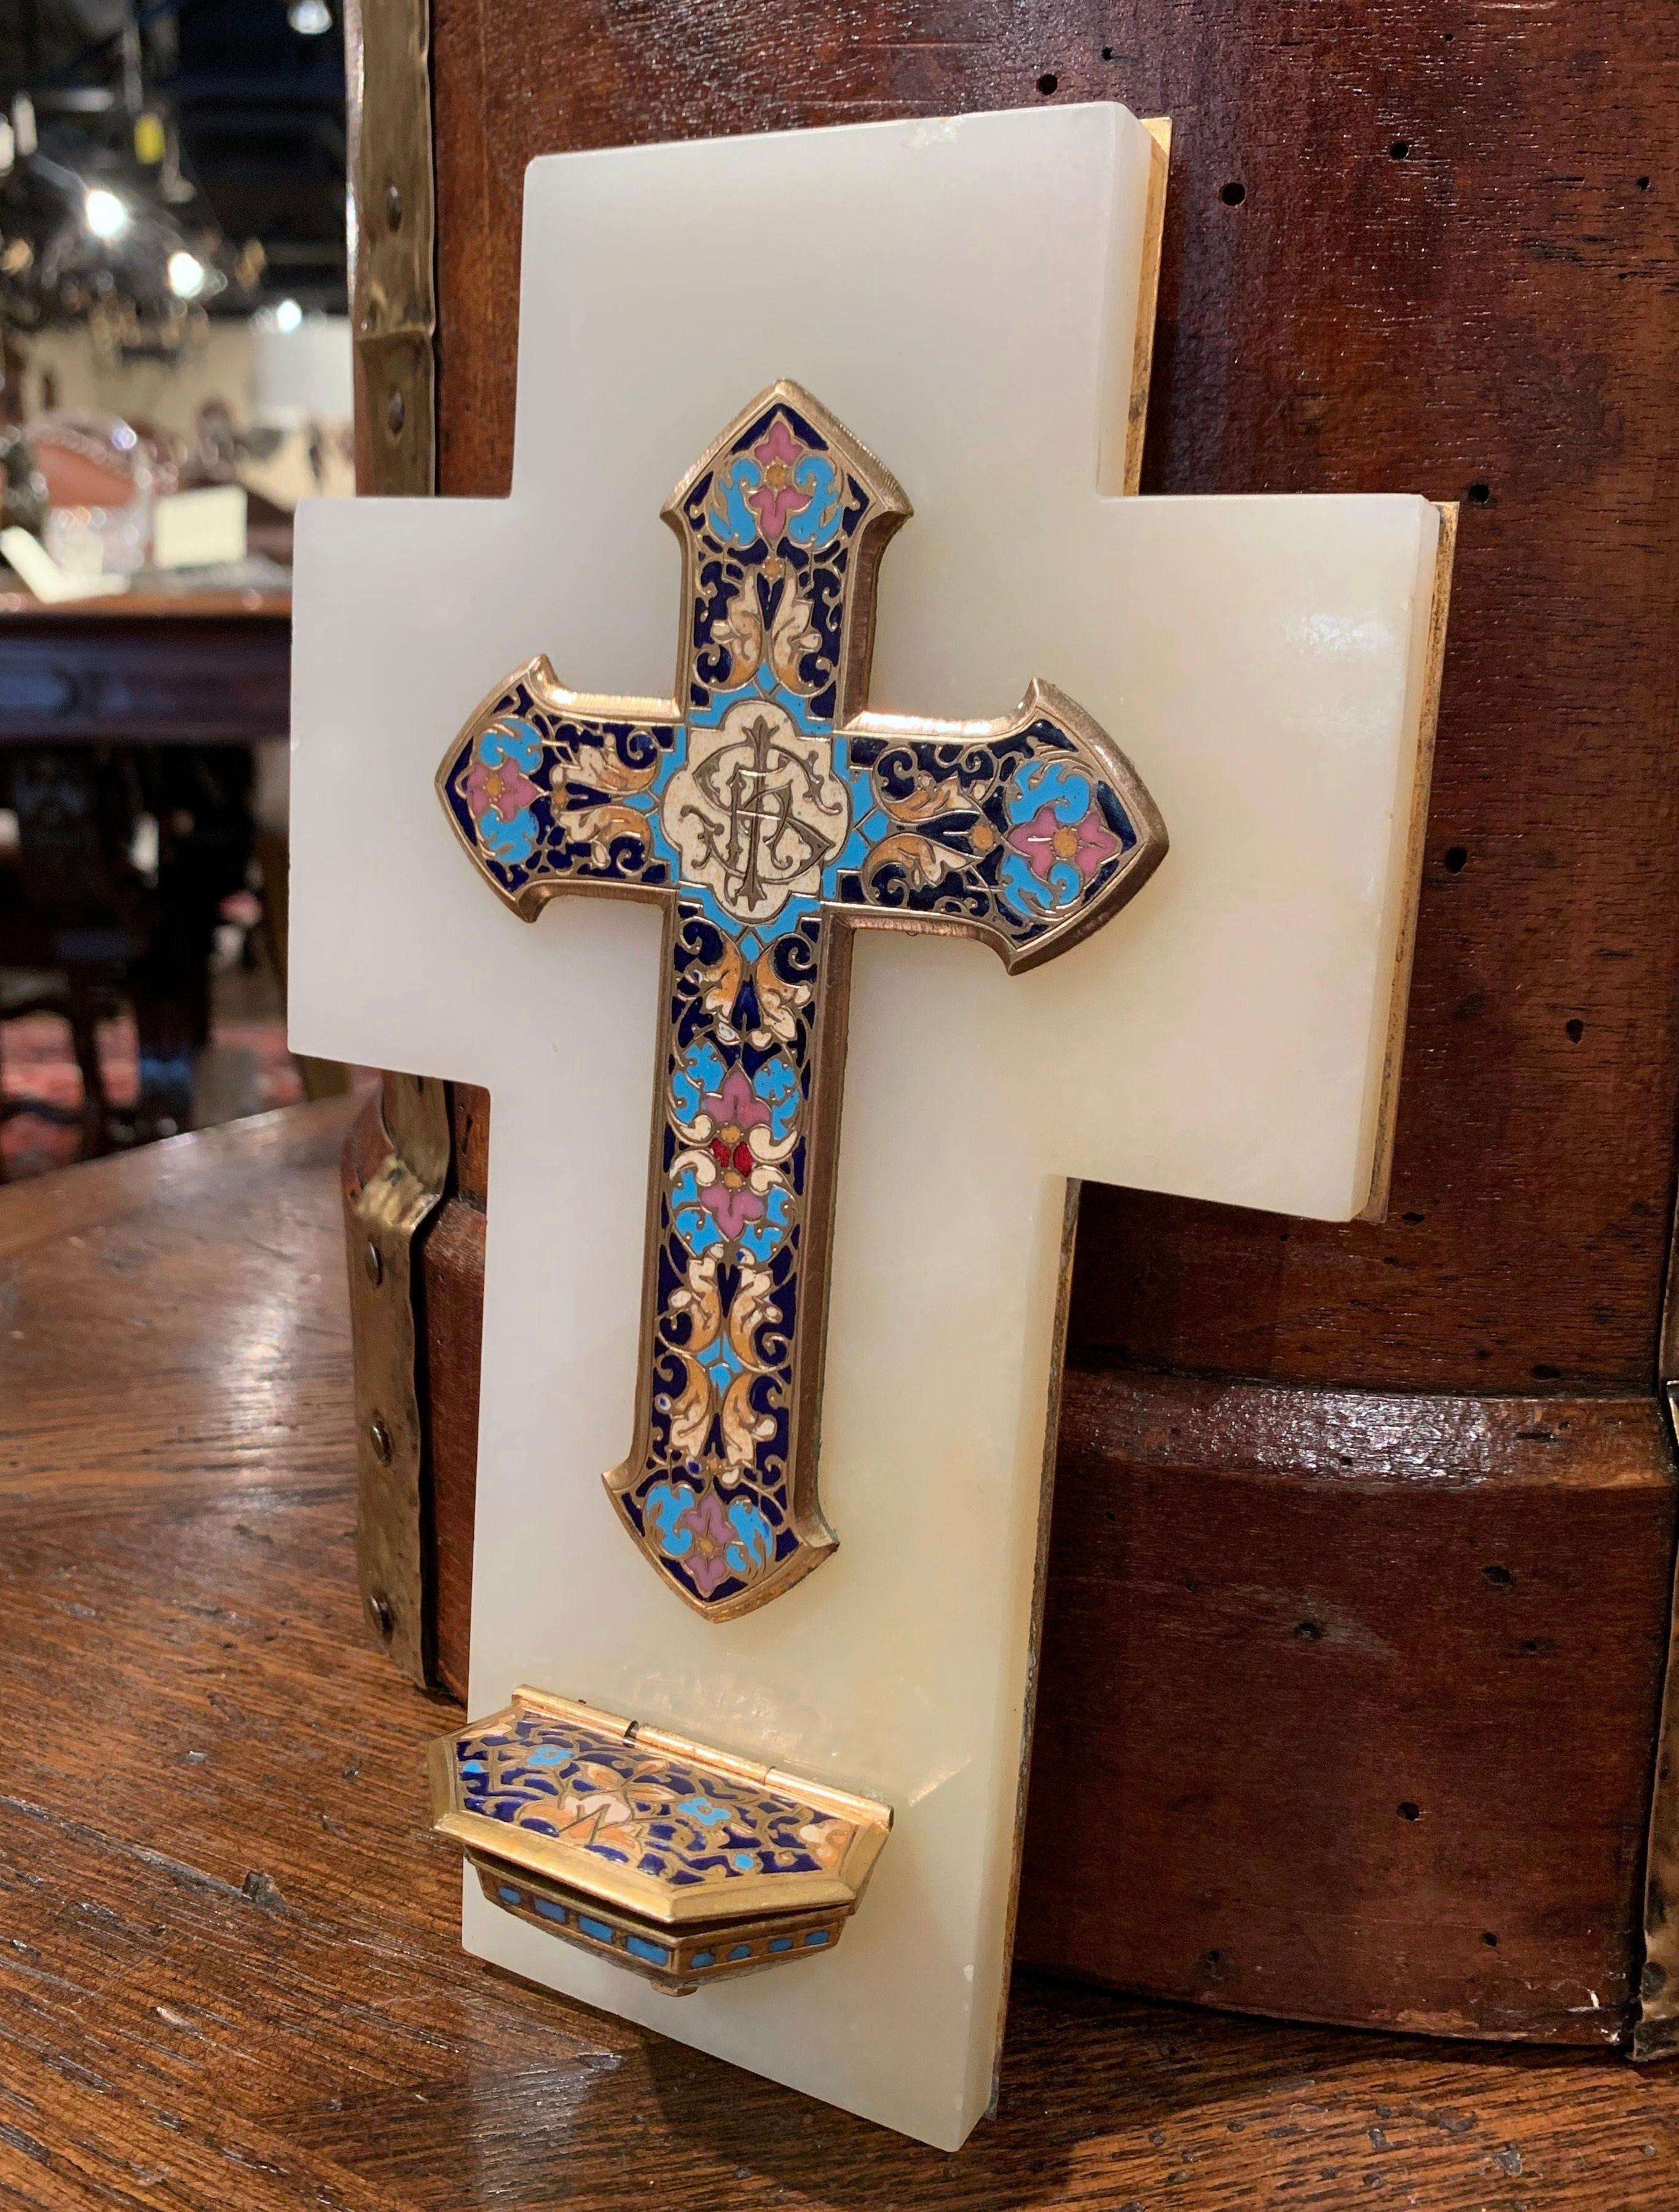 This large marble and brass cross with holy water recipient was created in France, circa 1880. The antique piece features beautiful, intricate cloisonné work with enamel, stone and bronze and a gleaming beige marble plaque. Cloisonné is an ancient